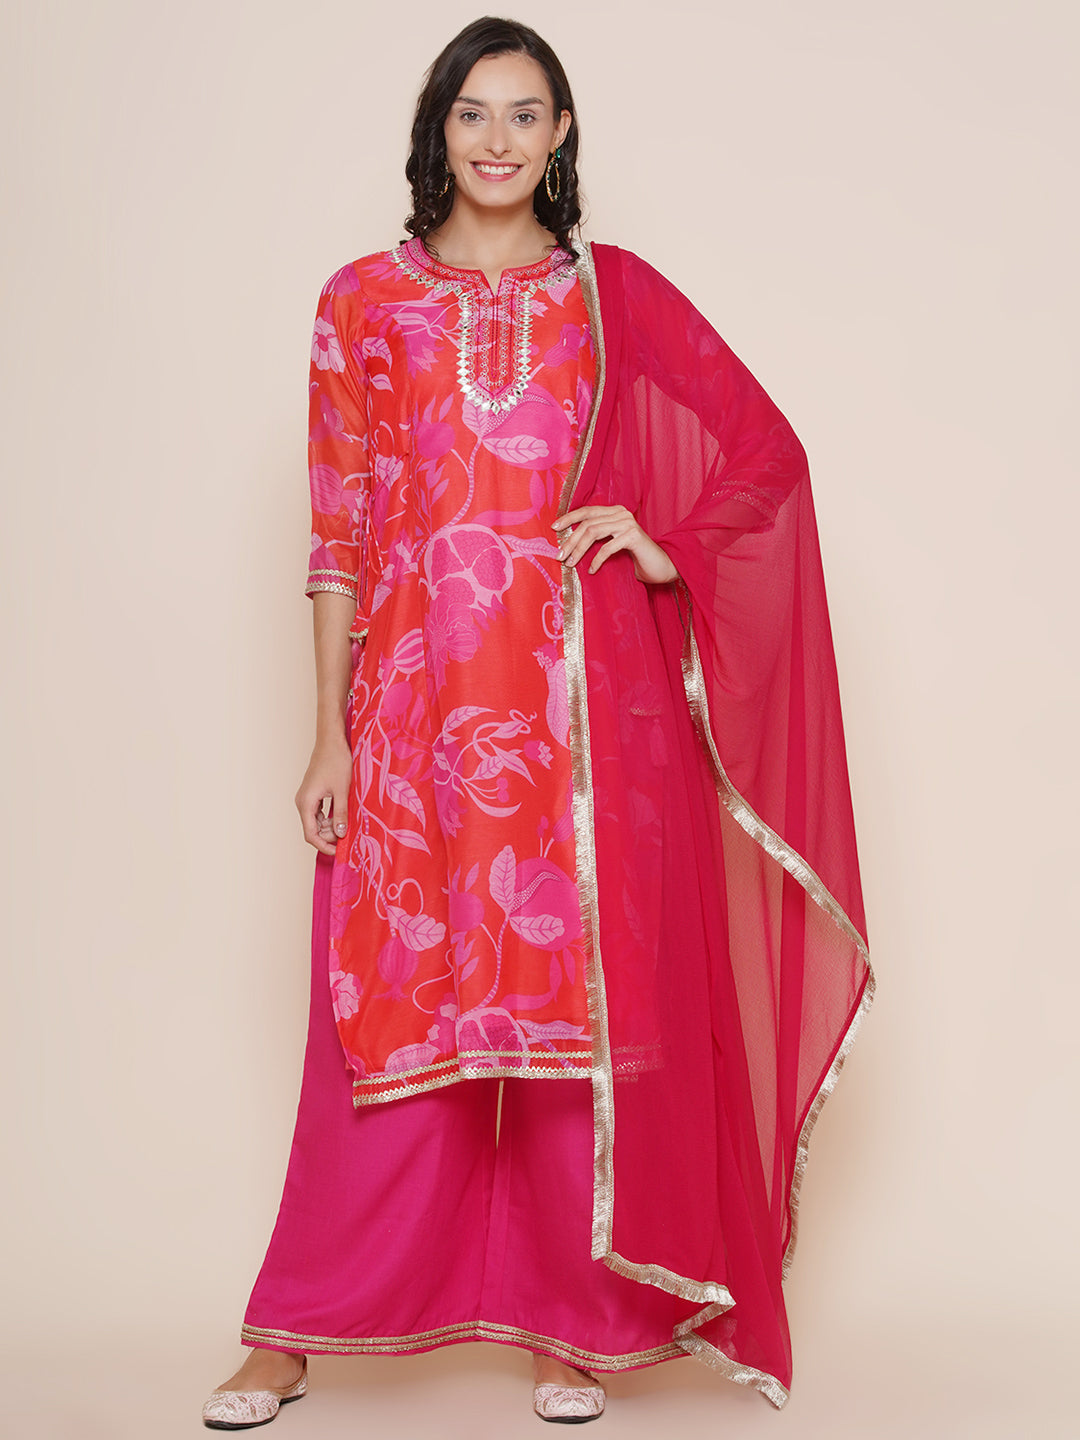 Red Neck Embroidered Floral Print Kurta with Pink Solid Palazzos with Dupatta